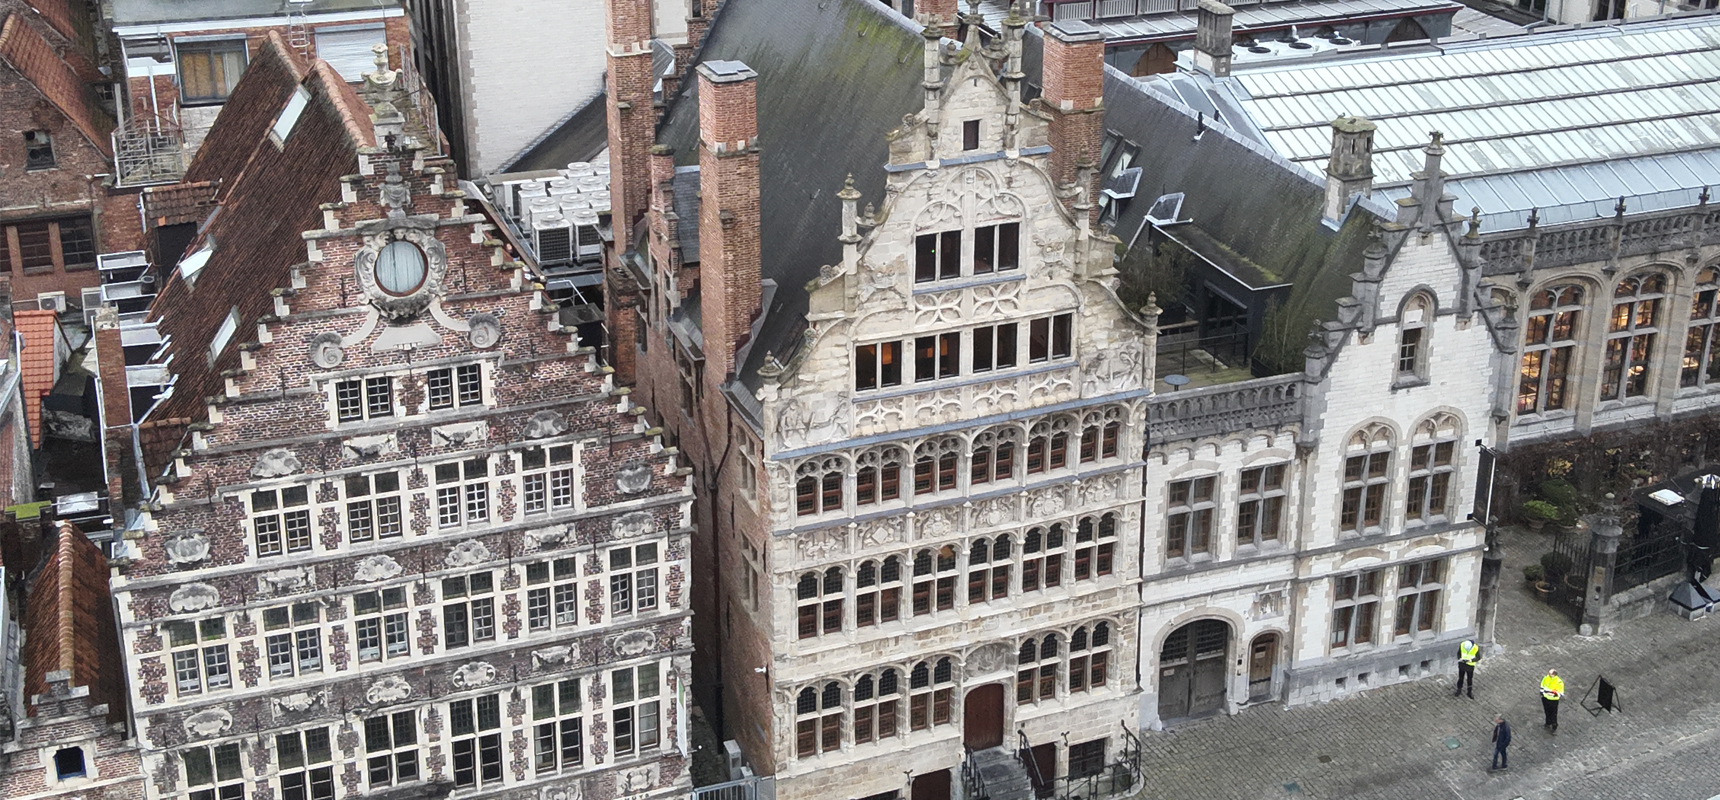 Monument Kerckhove - Visual inspection of a historic building (Ghent Harbor House)